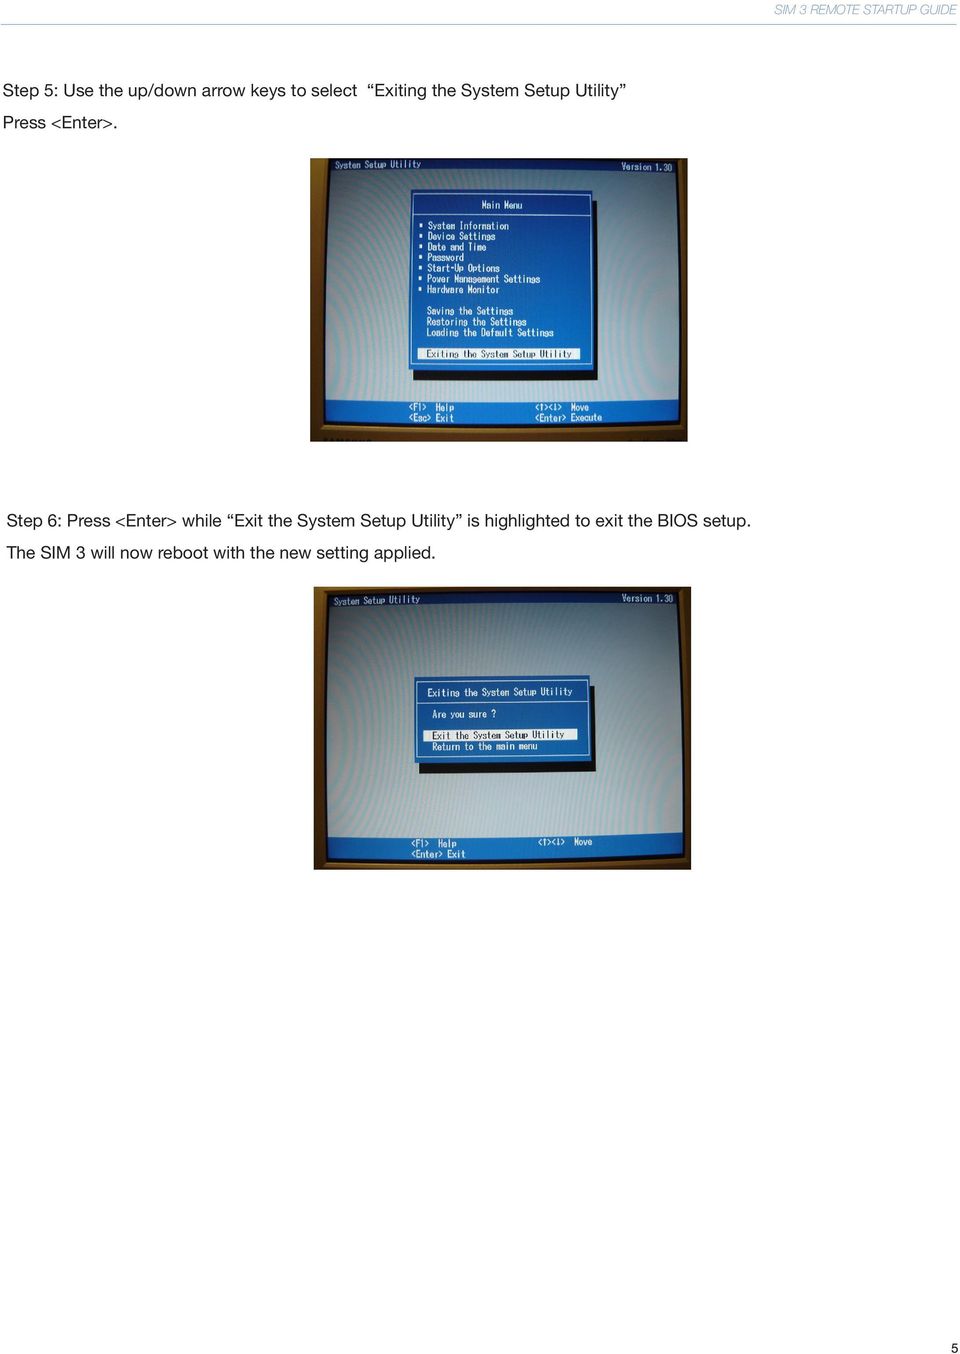 Step 6: Press <Enter> while Exit the System Setup Utility is